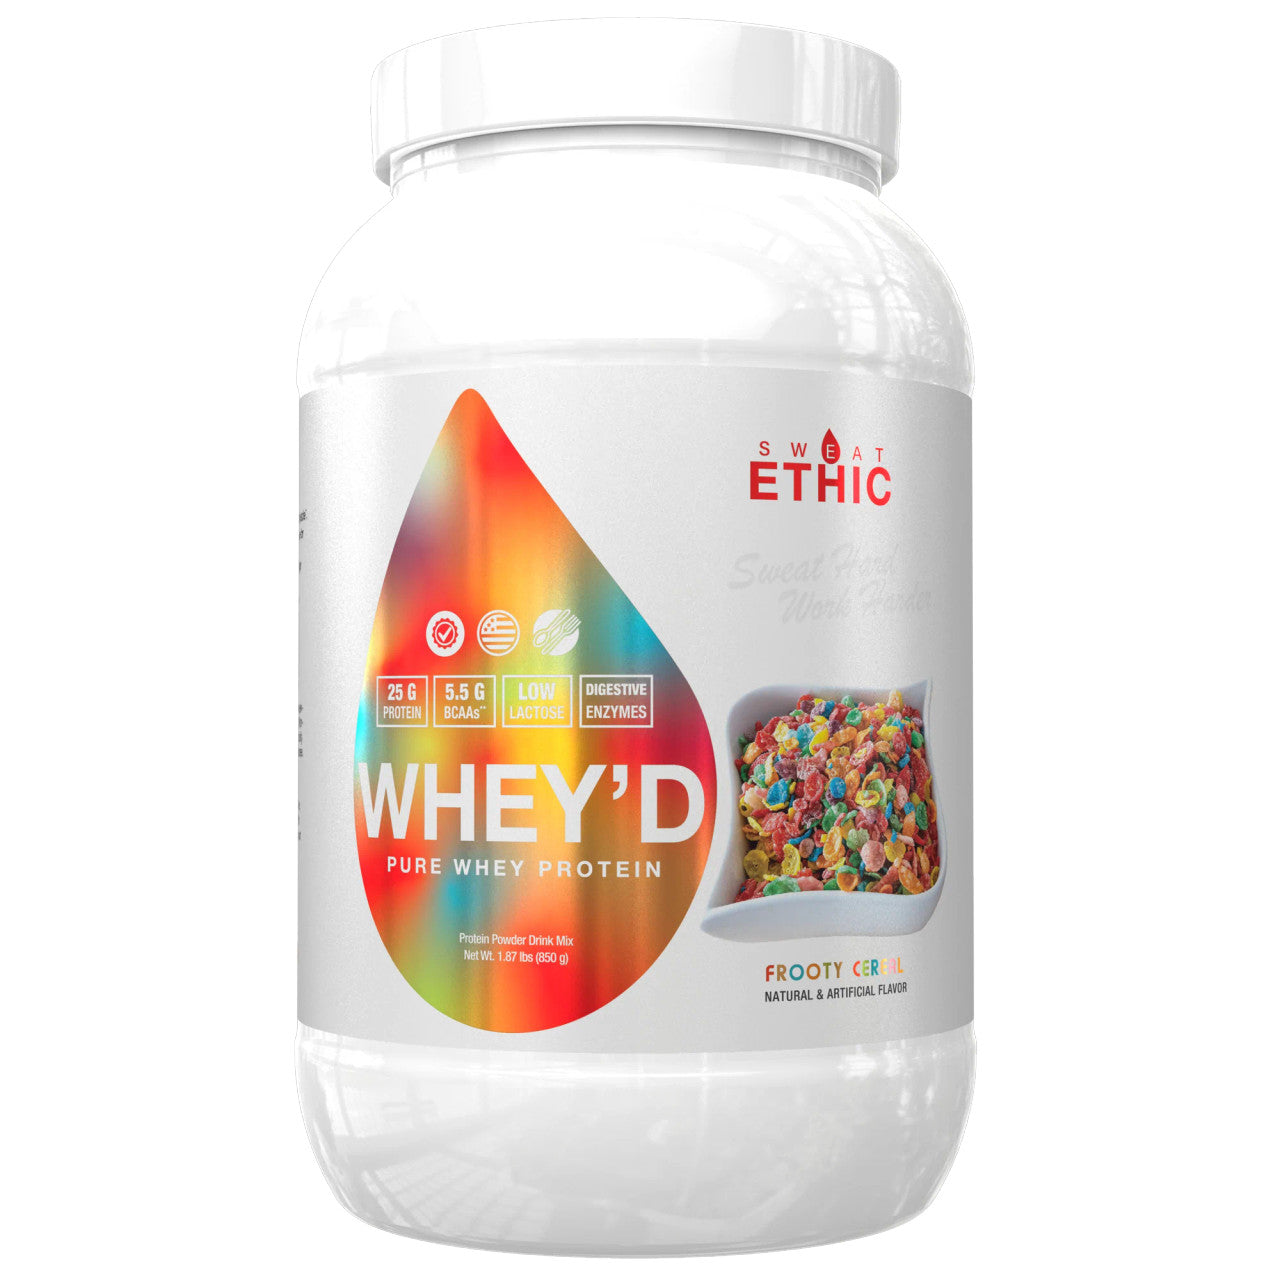 Whey'd Protein